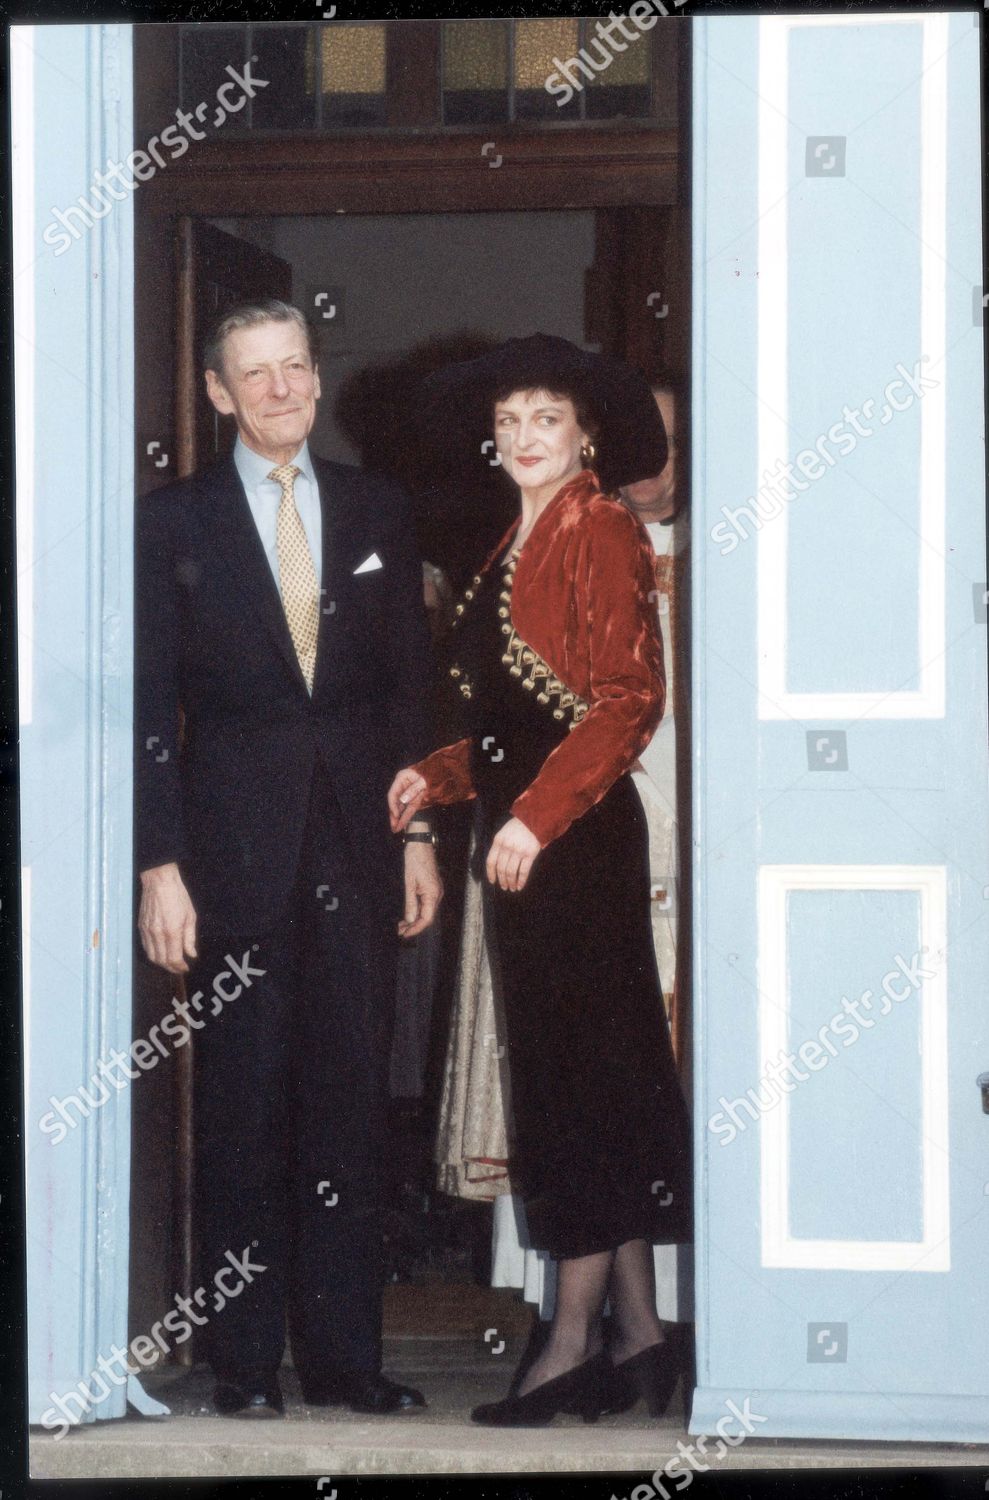 marina-ogilvy-paul-mowatt-wedding-day-scenes-feb-1990-hello-darling-sir-angus-ogilvy-meets-his-daughter-at-the-door-of-church-and-the-bride-wore-black-black-shoes-black-tights-black-dress-and-even-a-sweeping-black-hat-the-only-touc-shutterstock-editorial-1119349a.jpg